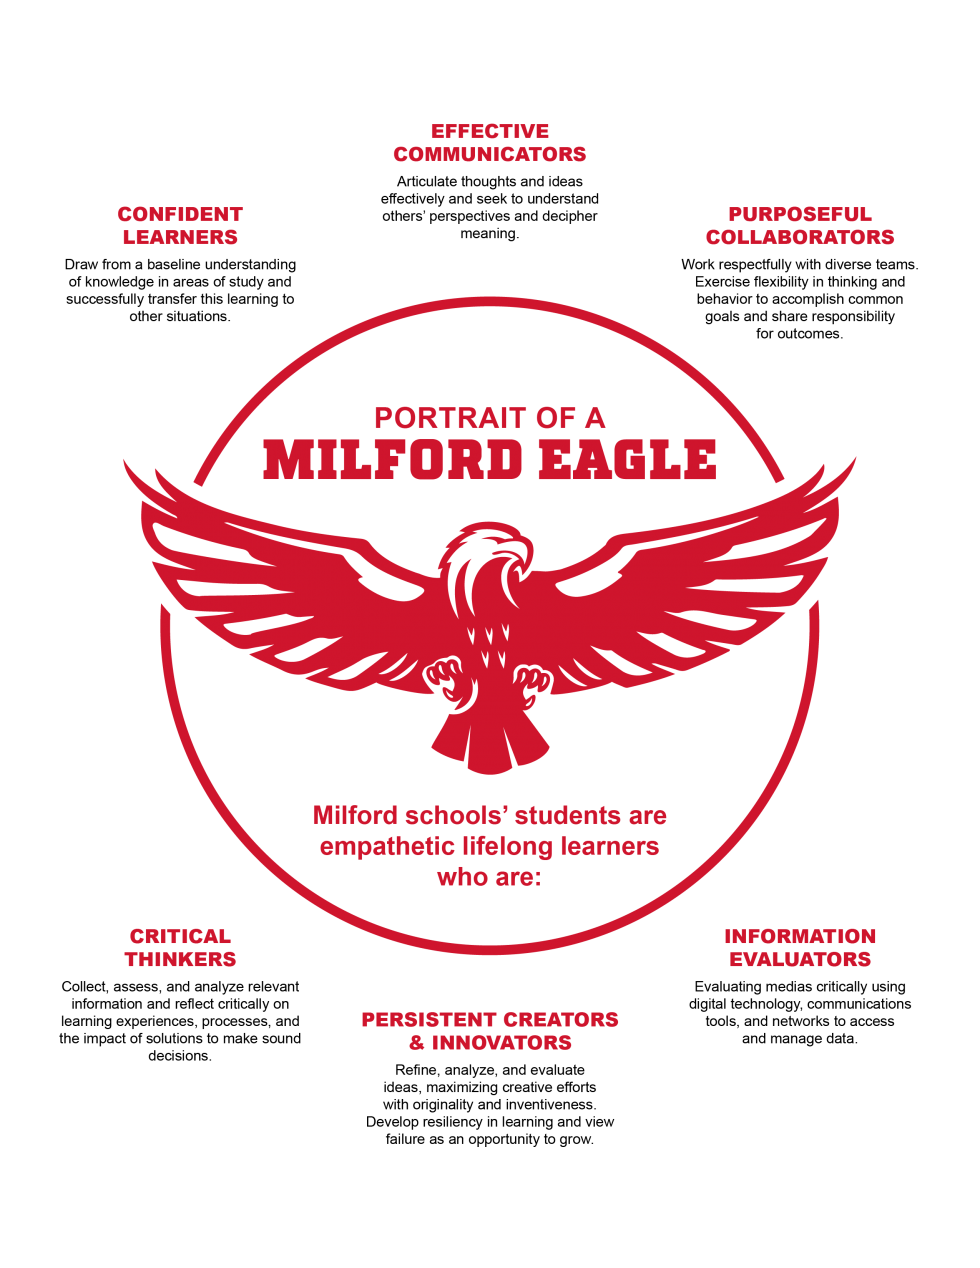 Portrait of a Milford Eagle poster with leadership qualities